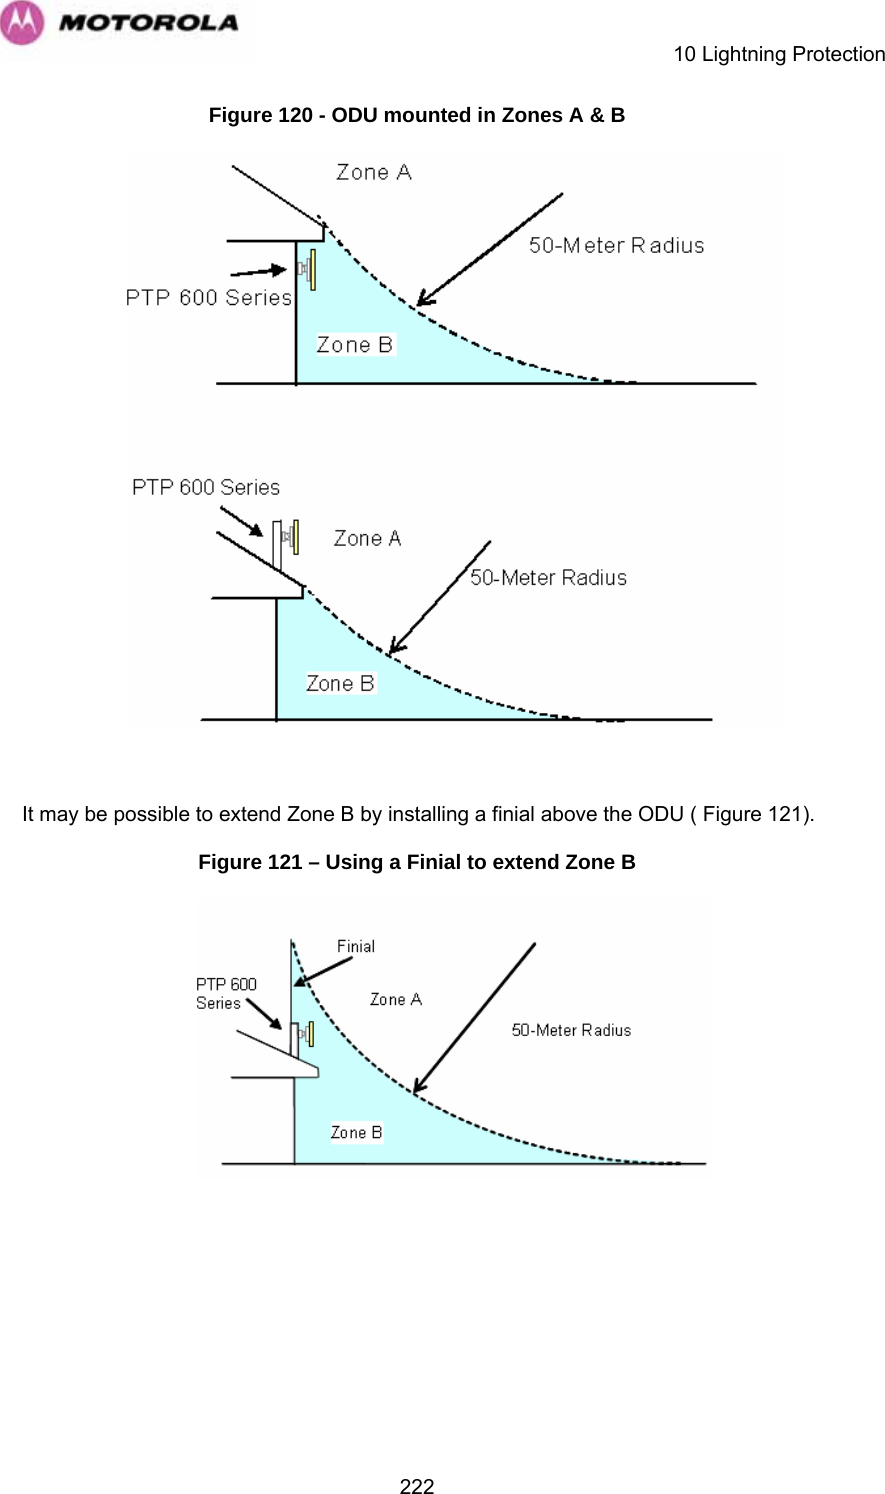    10 Lightning Protection  222Figure 120 - ODU mounted in Zones A &amp; B   It may be possible to extend Zone B by installing a finial above the ODU ( Figure 121). Figure 121 – Using a Finial to extend Zone B    